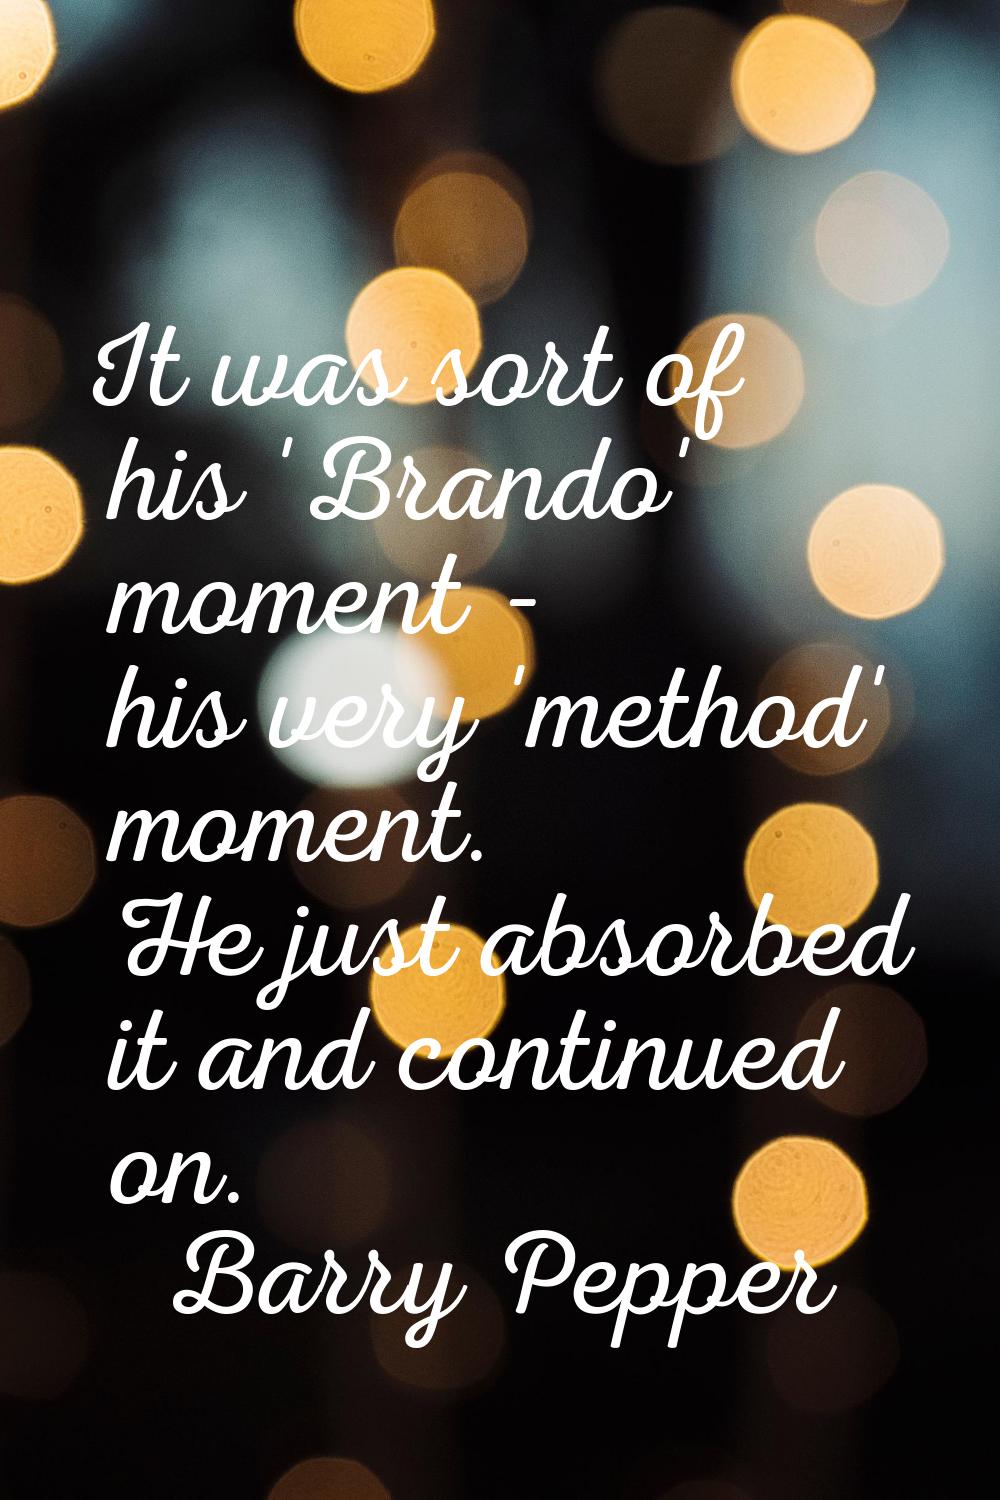 It was sort of his 'Brando' moment - his very 'method' moment. He just absorbed it and continued on